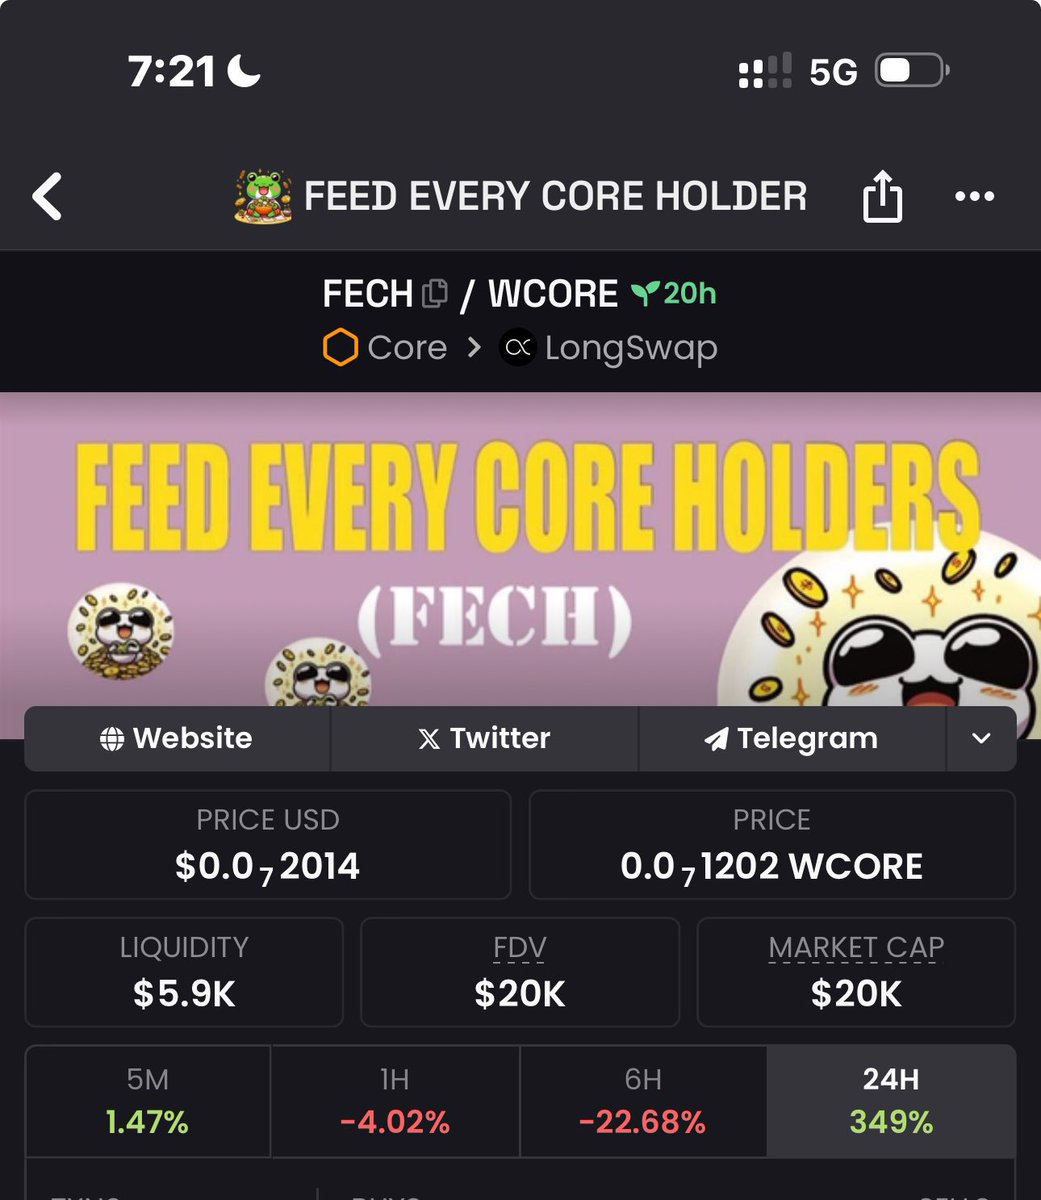 @COREAllday @dxsale @SolidProof_io @FusionTechh @DogWifCORE Gm #Coretoshi army 🚀

AVE.AI , DEX SCREENER & GECKO TERMINAL listing done as of now

Once we crossed $10K in Liquidity, we can get listed on OpenEx automatically as their system

$CORE #CORE #FECH